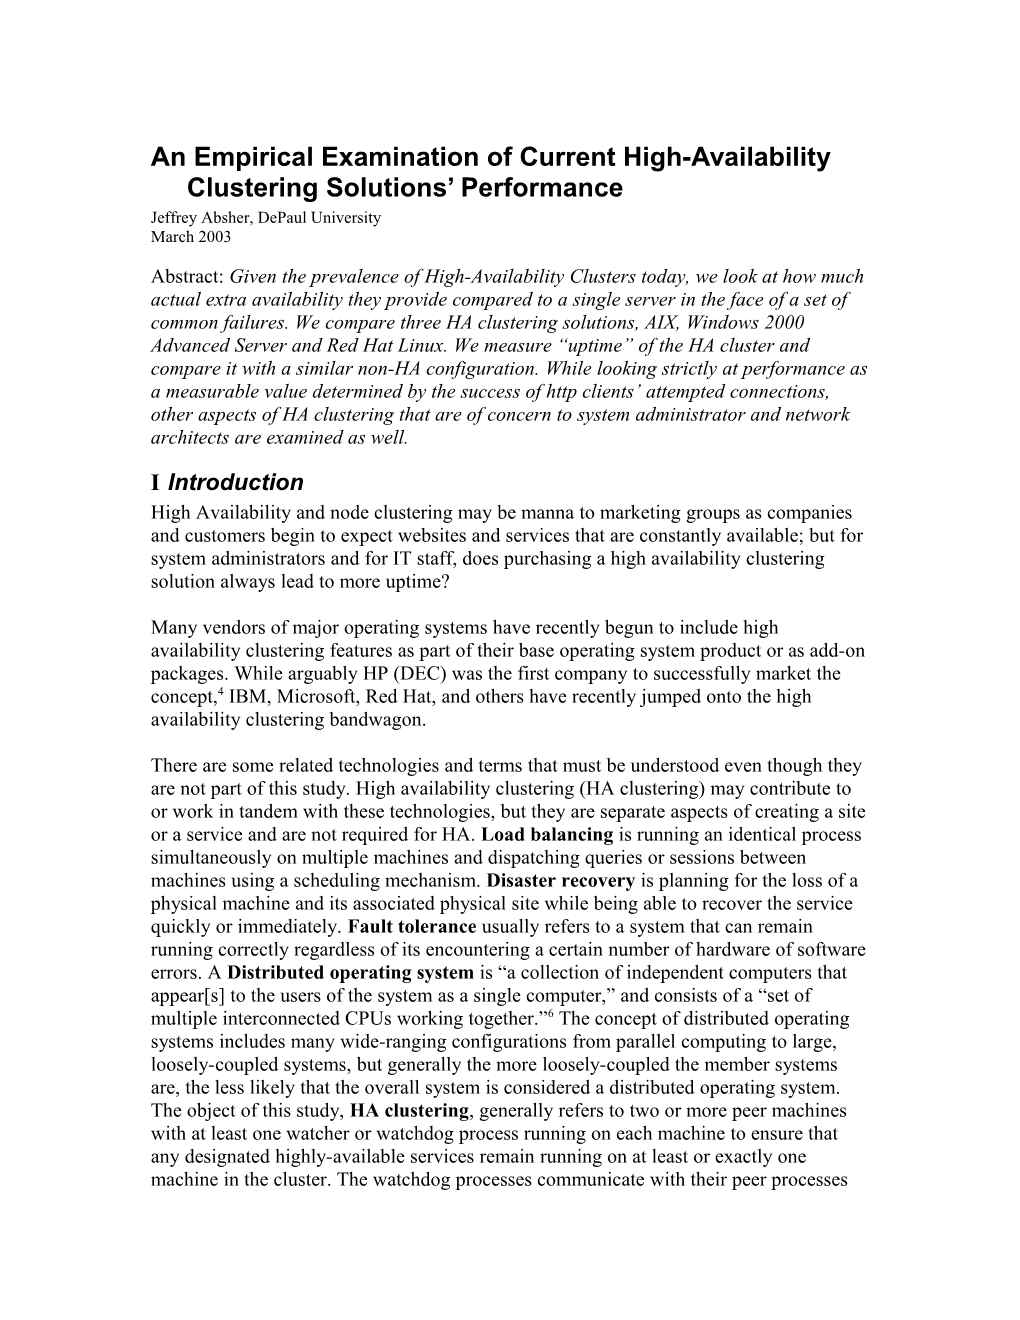 An Empirical Examination of Current Loosely-Integrated High Availability Clustering Solutions